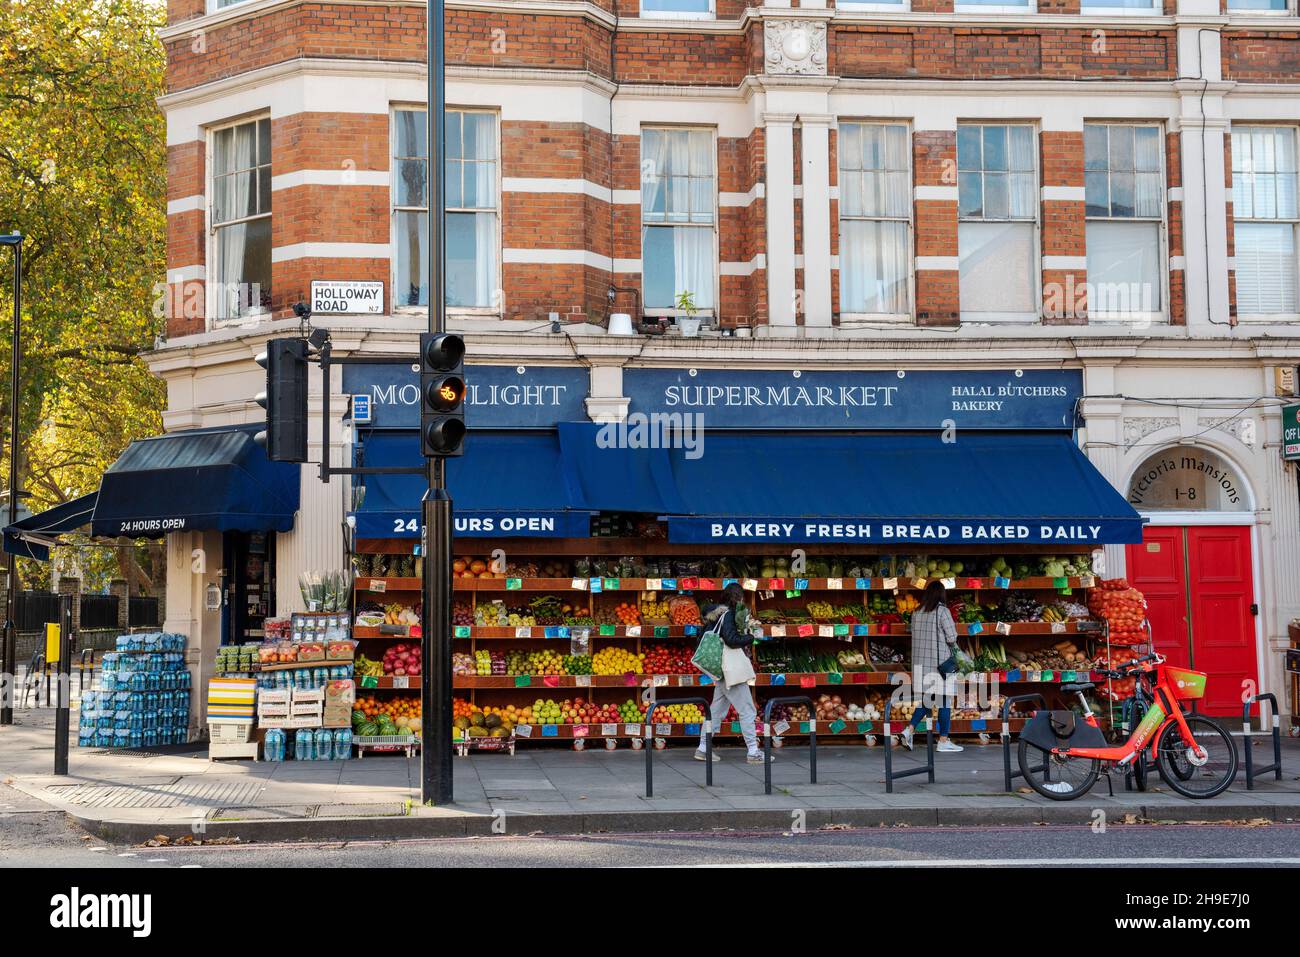 Moonlight Supermarket store displaying fruit and vegetables outside with people in front Holloway Road London Borough of Islington Stock Photo